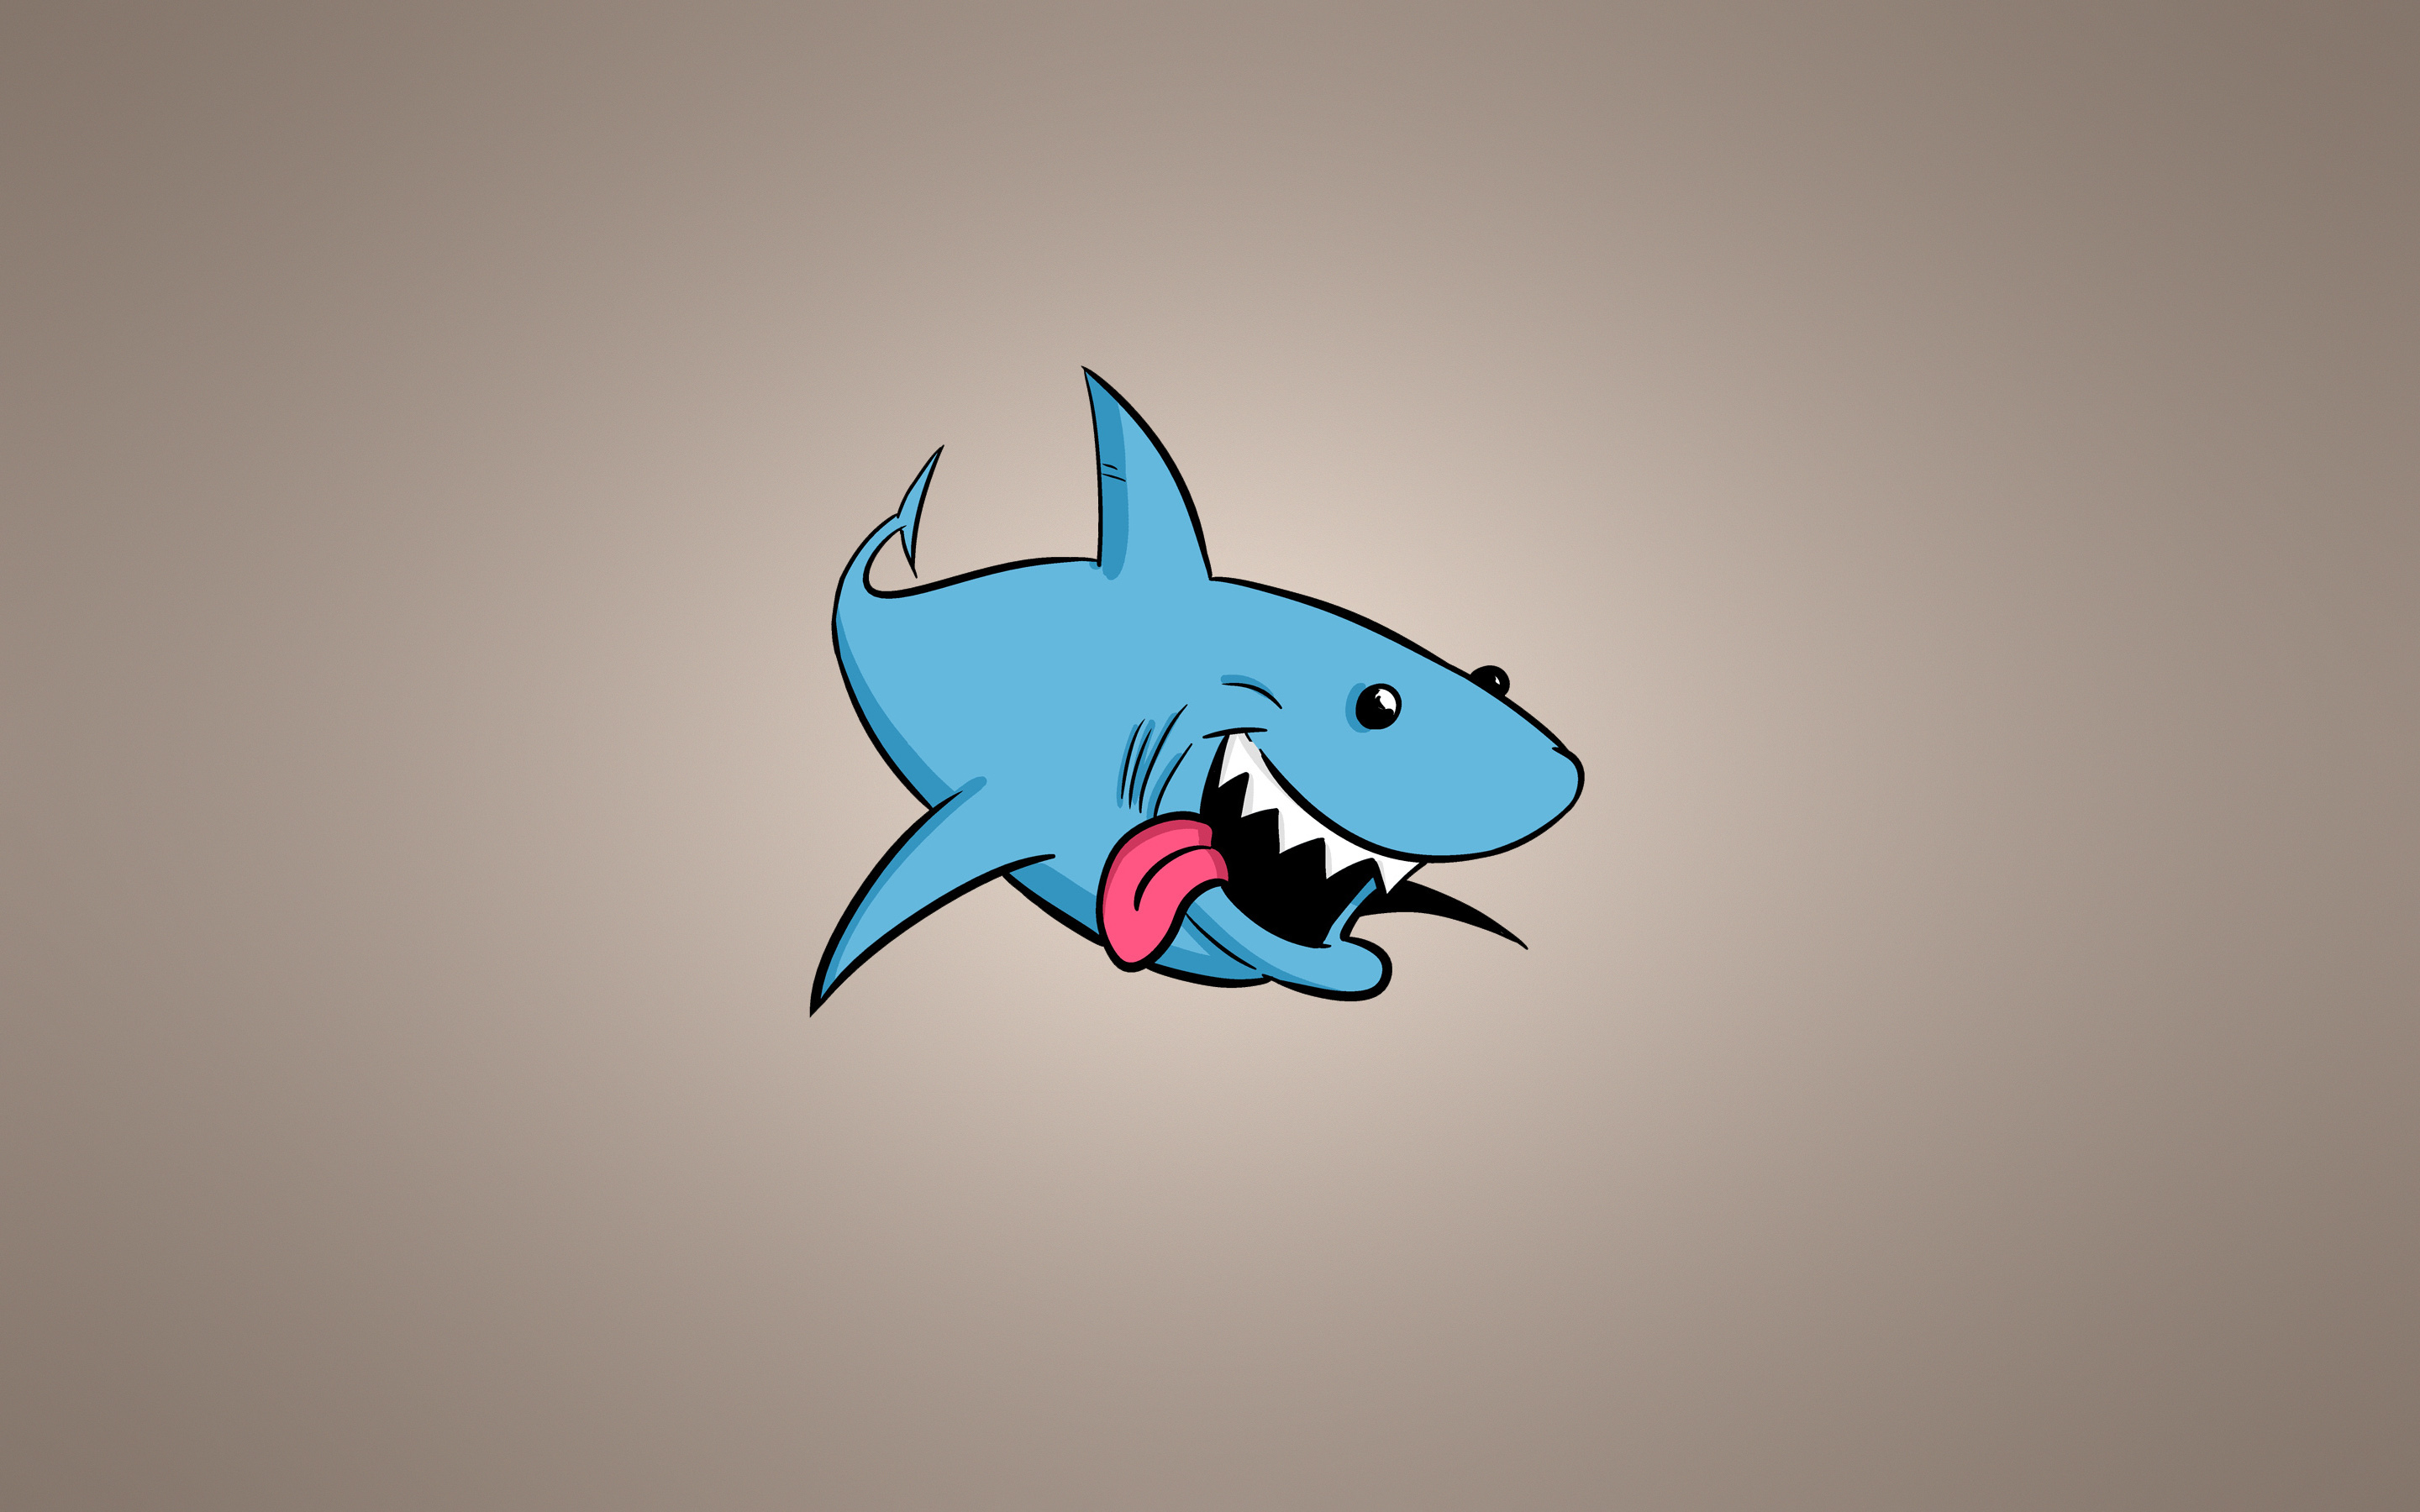 background, vector, art, protruding tongue, tongue stuck out, shark